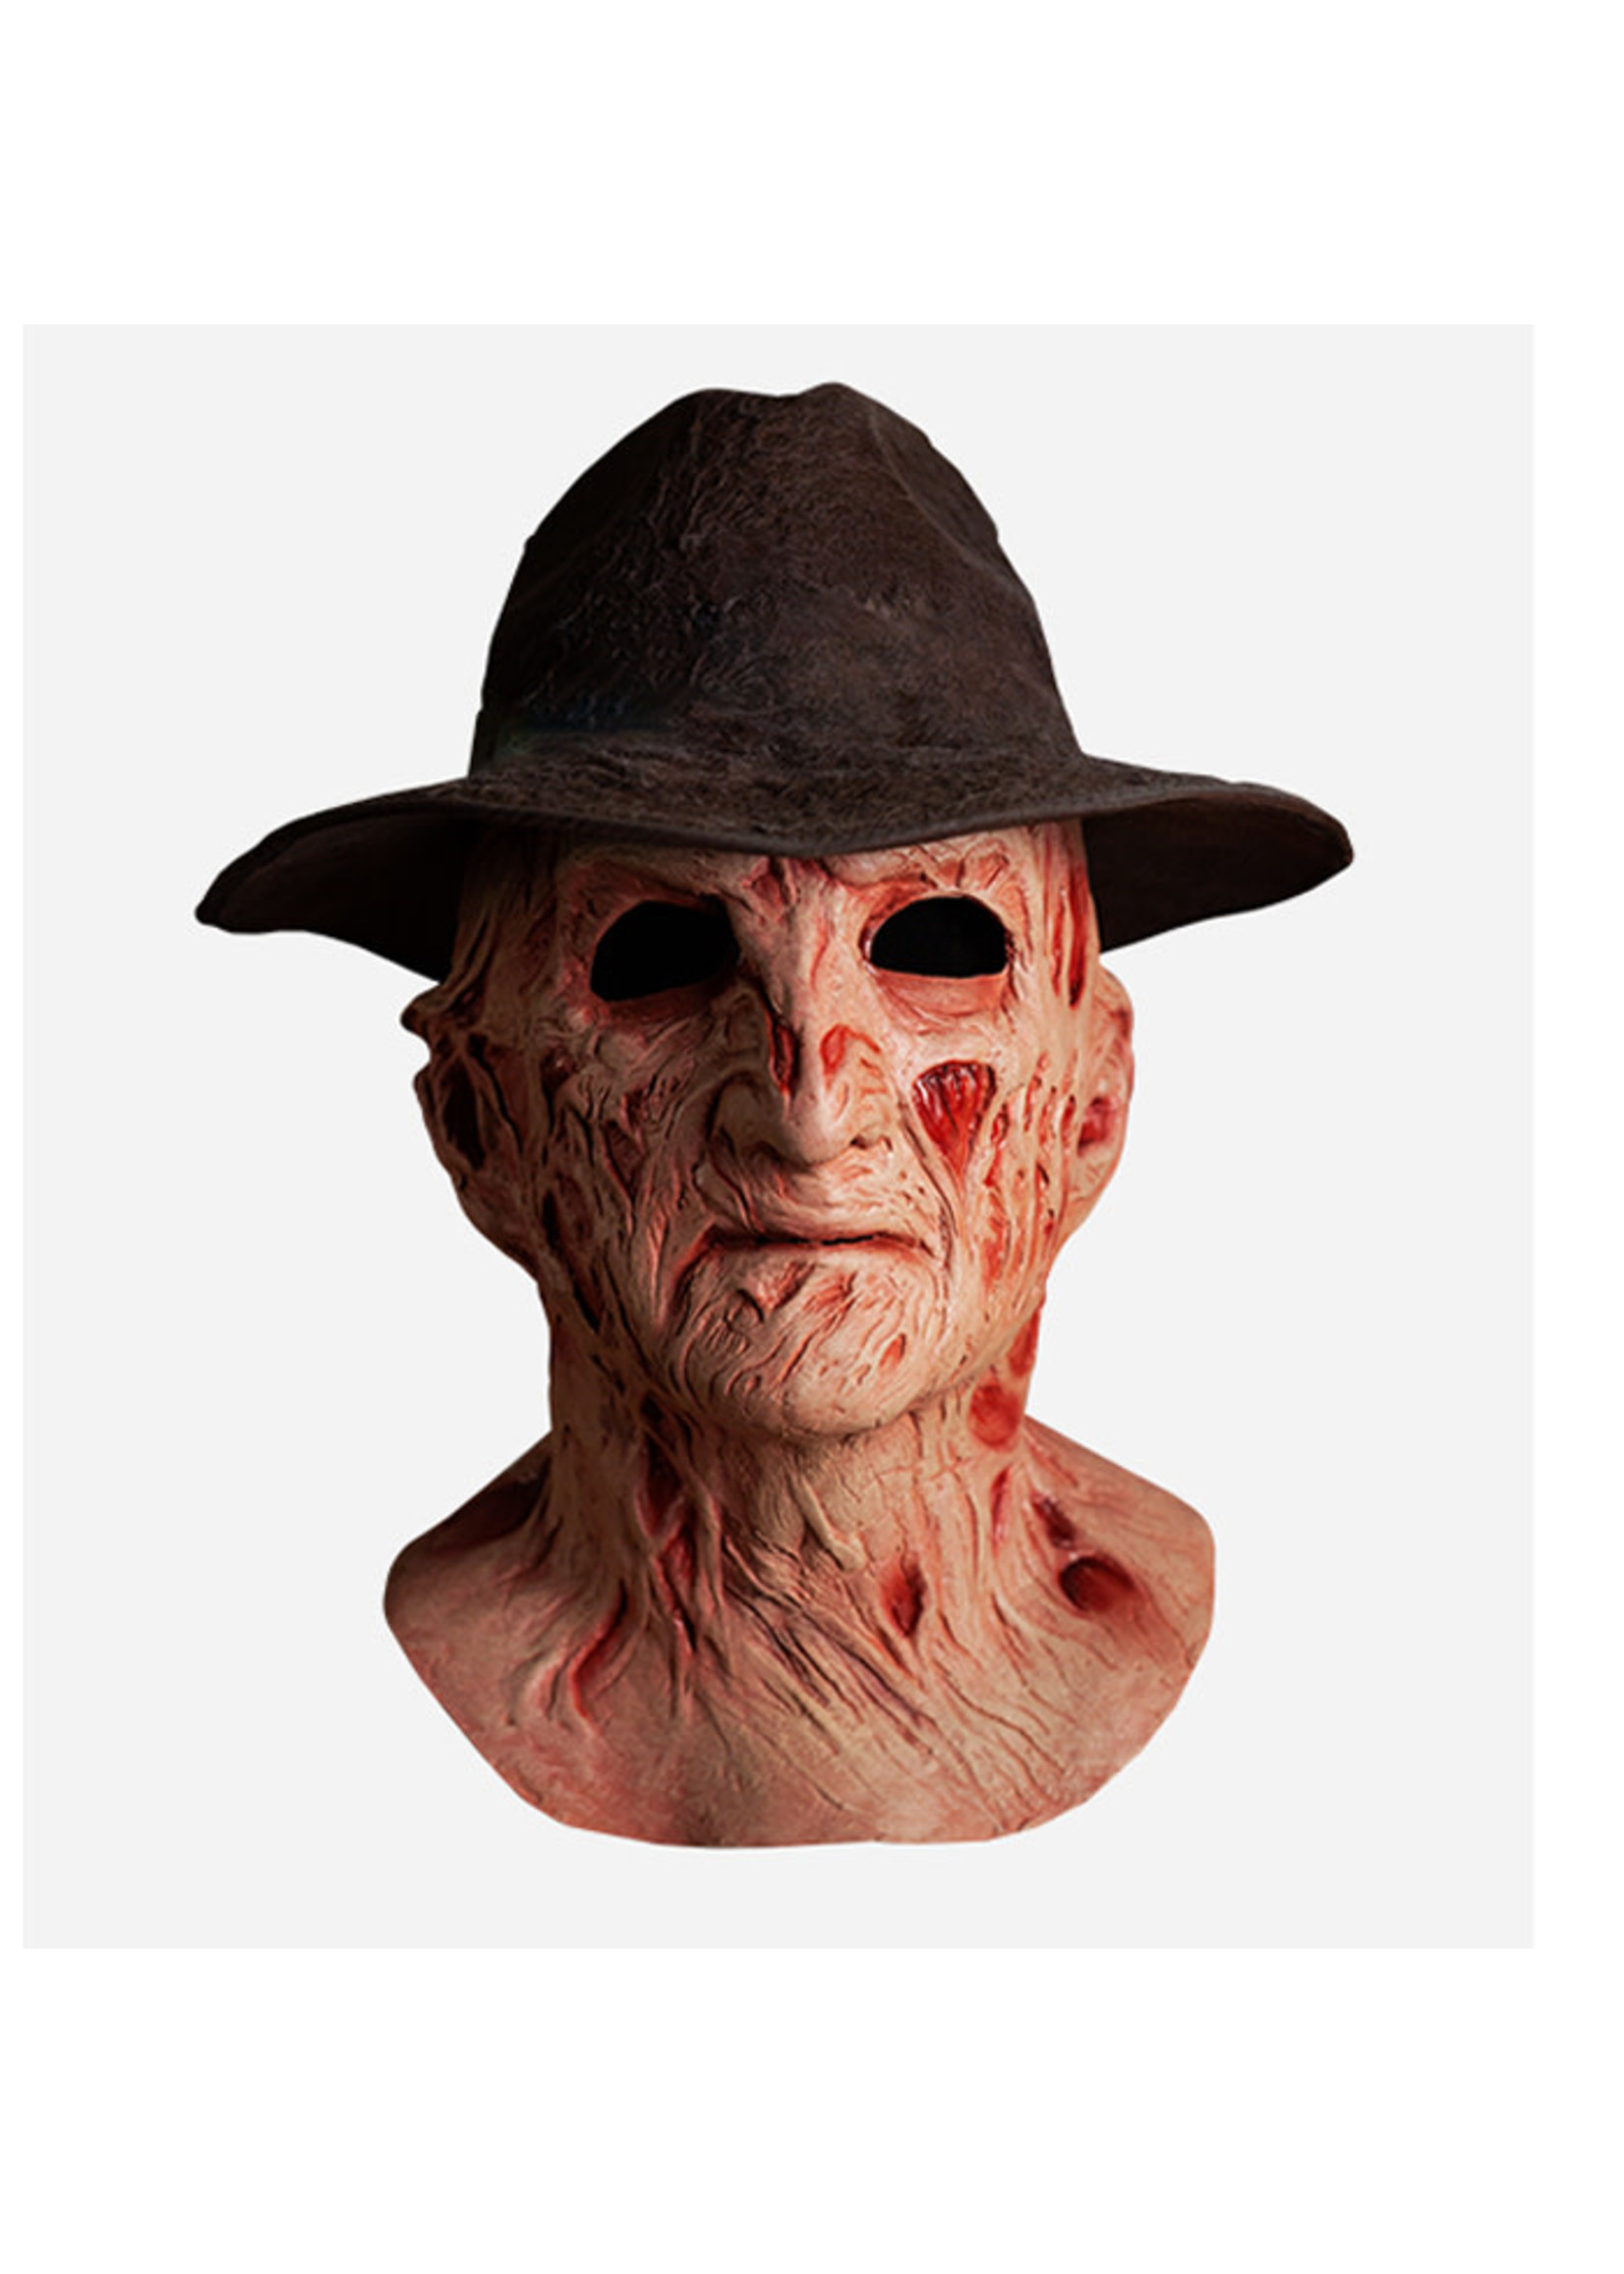 TRICK OR TREAT A NIGHTMARE ON ELM STREET 4: THE DREAM MASTER - DELUXE FREDDY KRUEGER MASK WITH FEDORA HAT